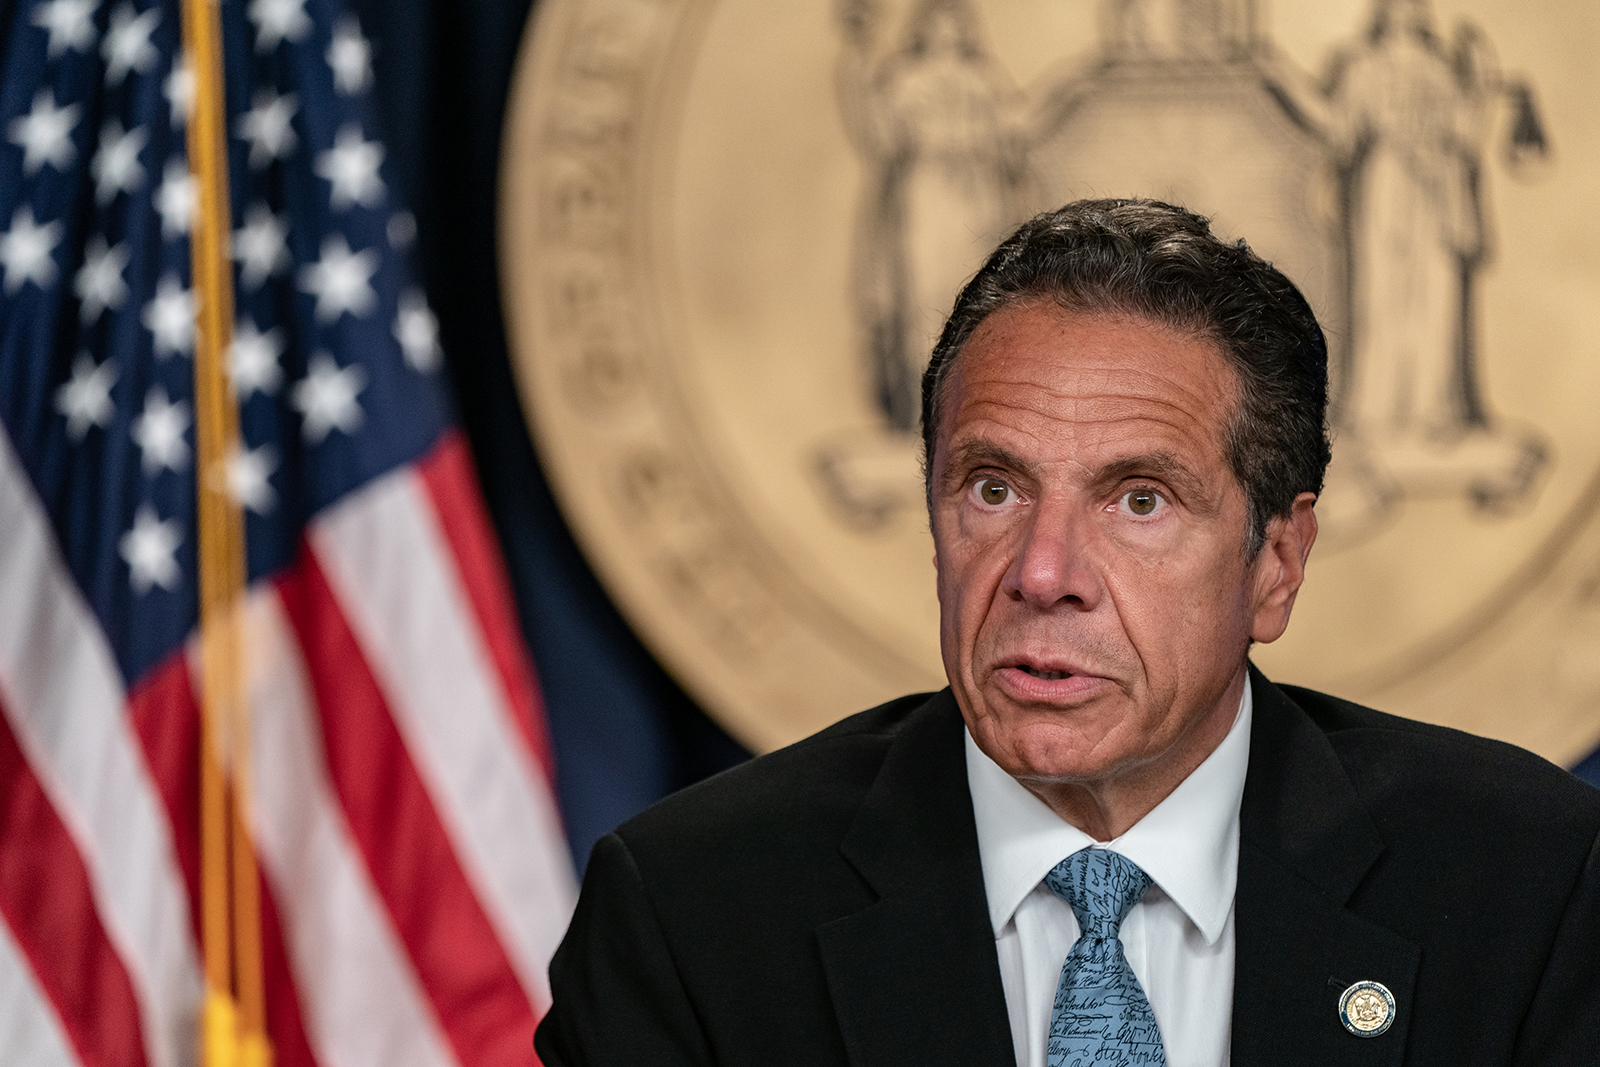 NEW YORK, NY - JULY 23: New York Gov. Andrew Cuomo speaks during the daily media briefing at the Office of the Governor of the State of New York on July 23, 2020 in New York City. The Governor said the state liquor authority has suspended 27 bar and restaurant alcohol licenses for violations of social distancing rules as public officials try to keep the coronavirus outbreak under control. (Photo by Jeenah Moon/Getty Images)